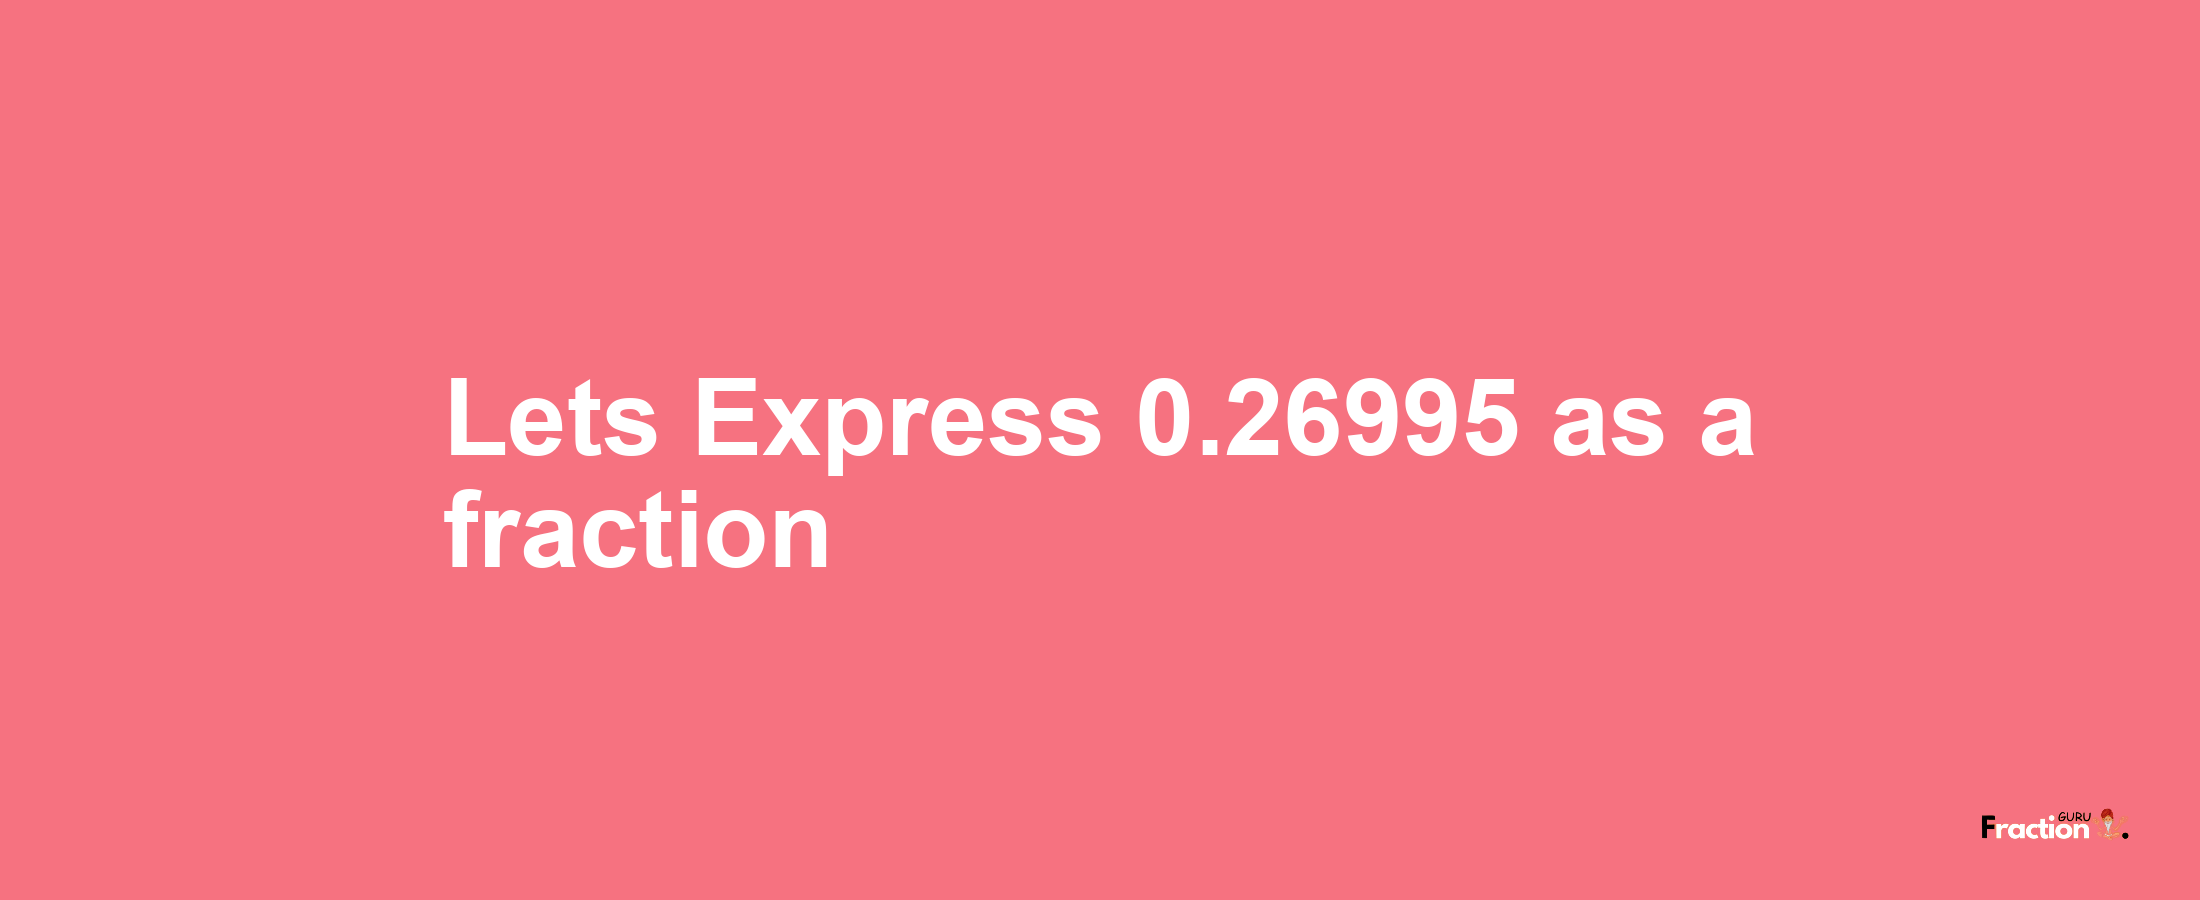 Lets Express 0.26995 as afraction